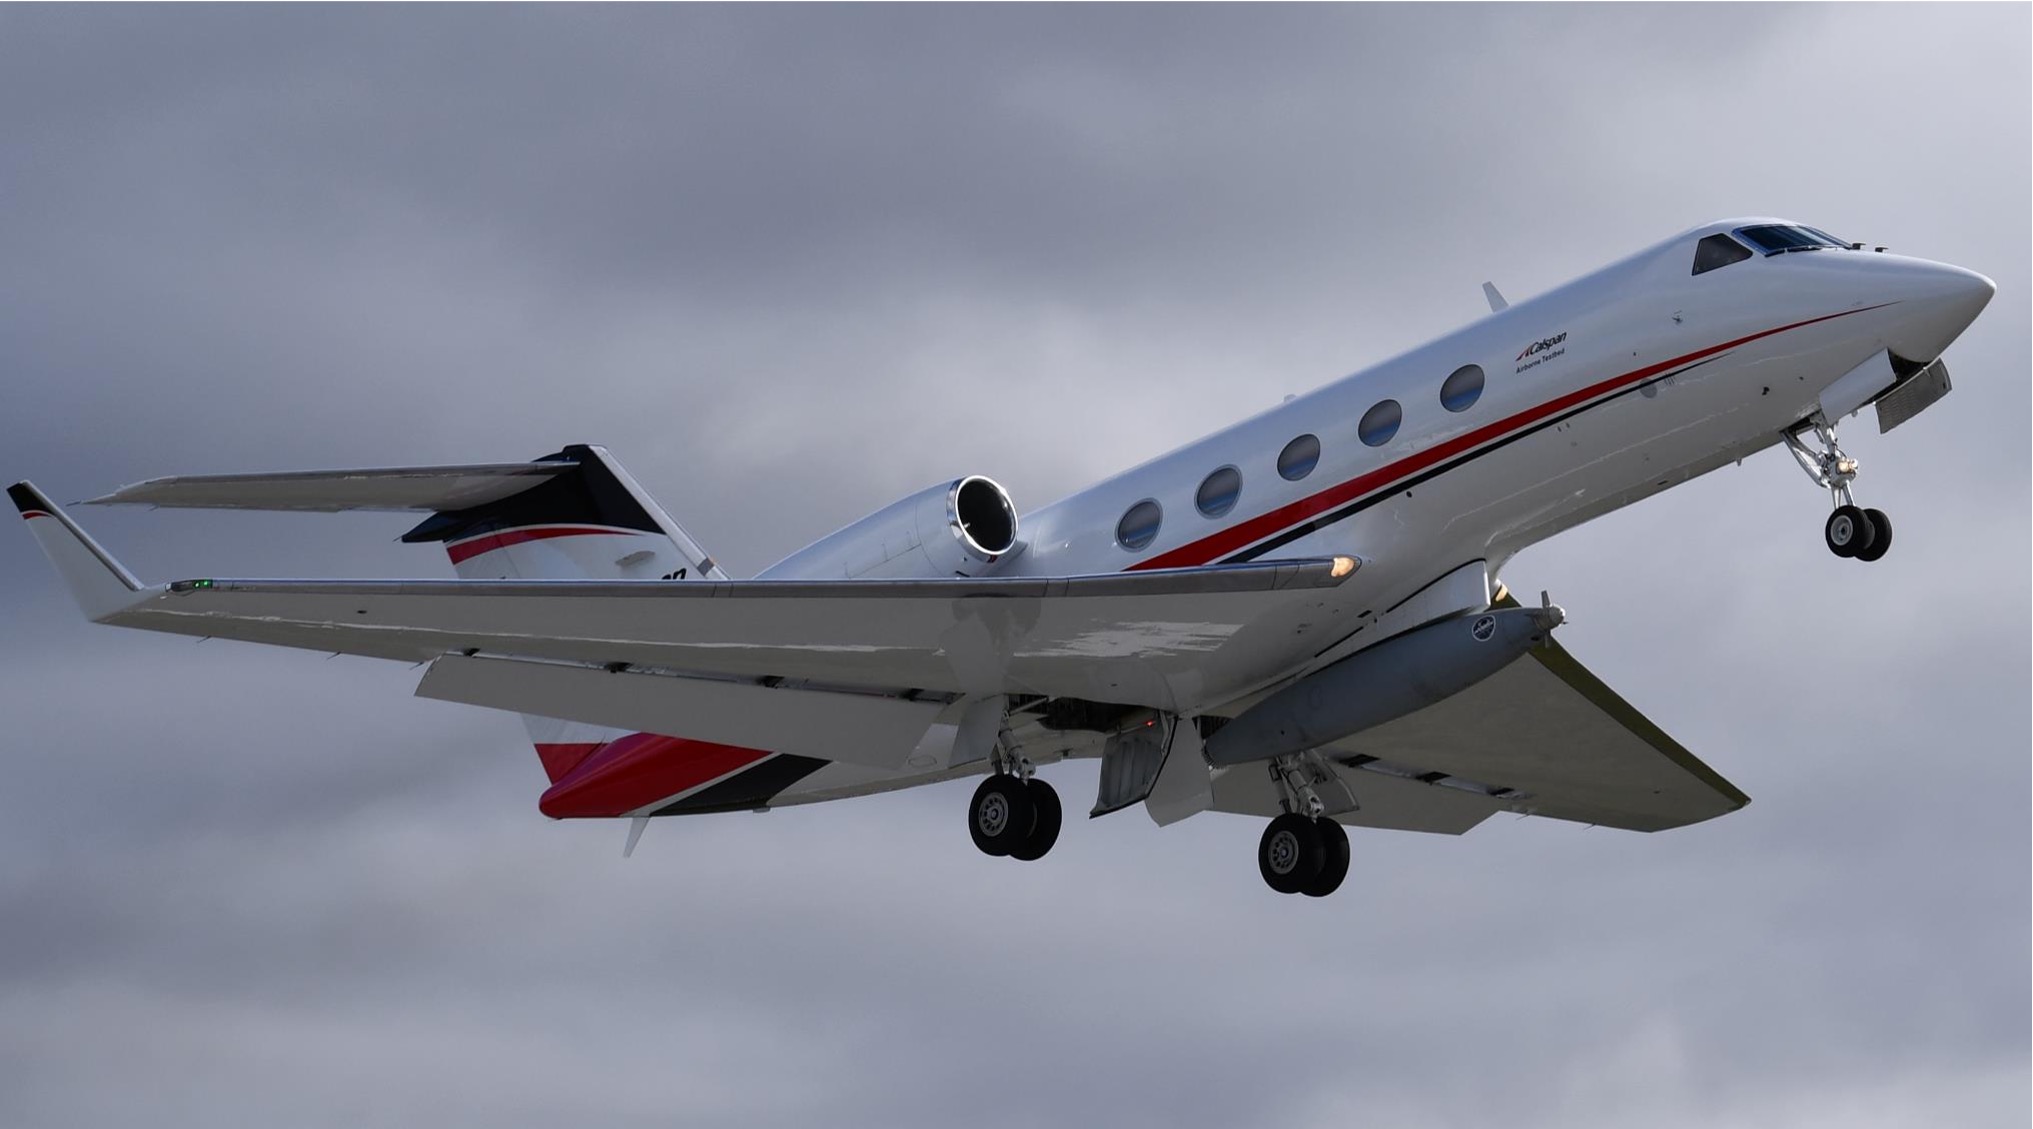 Capable Airborne Testbeds: Gulfstream III